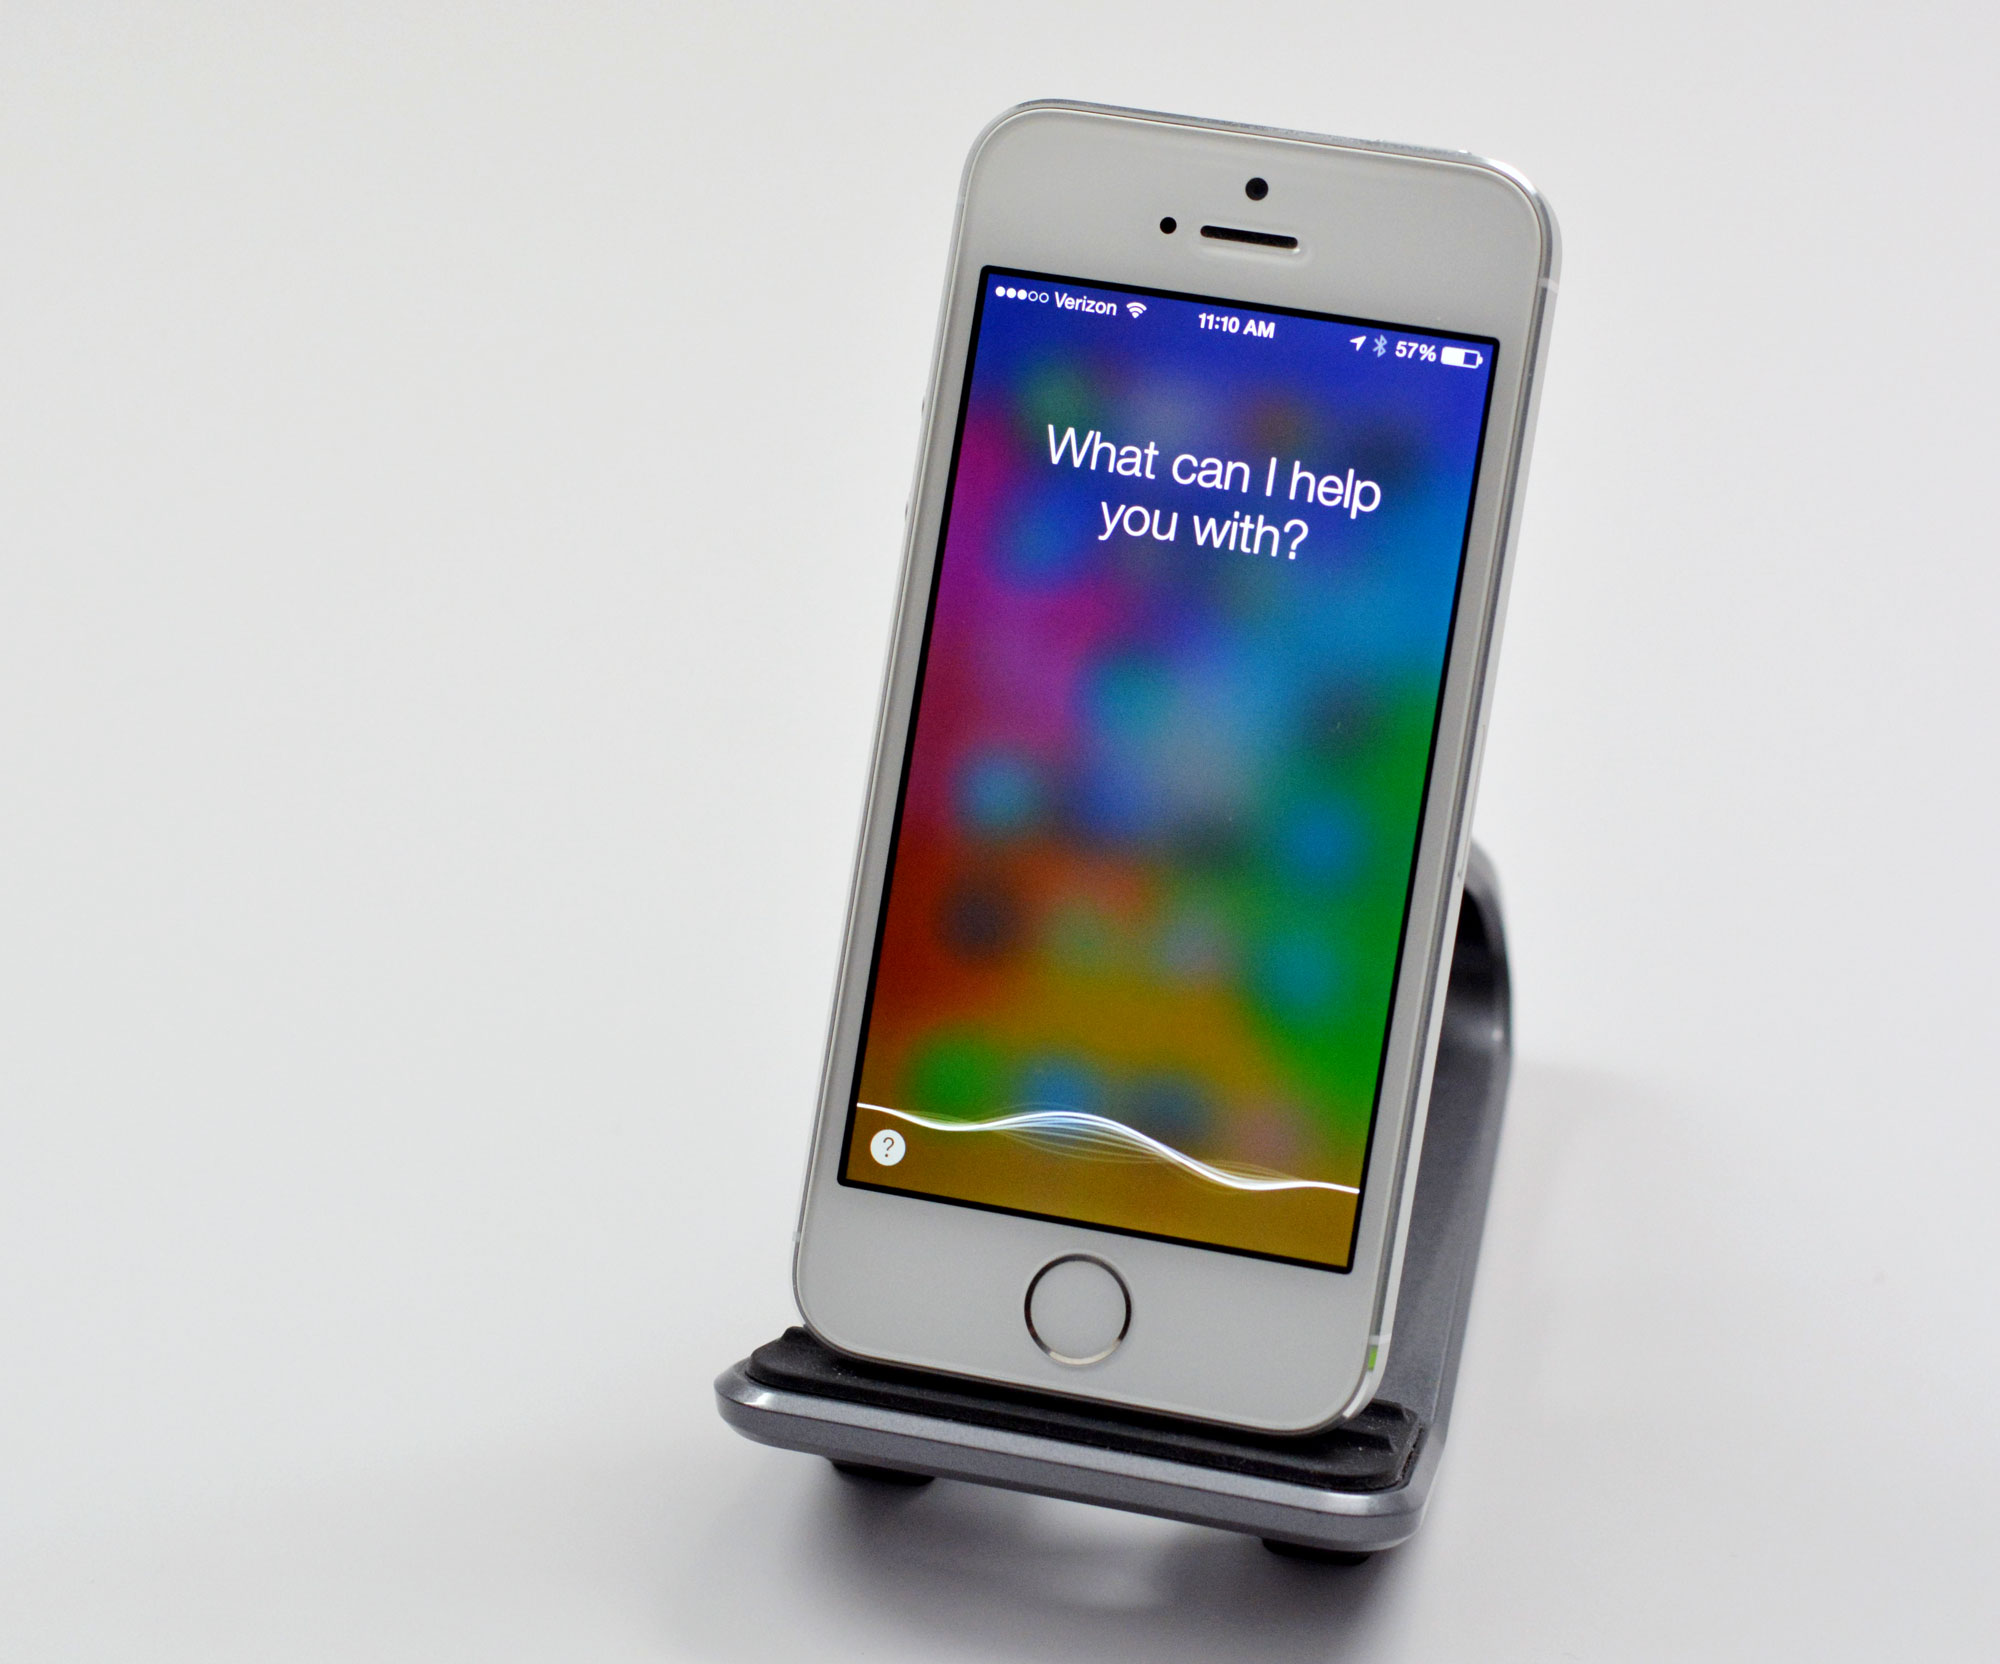 The iOS 7.1.2 release could bring fixes for several iOS 7.1.1 problems in early July.